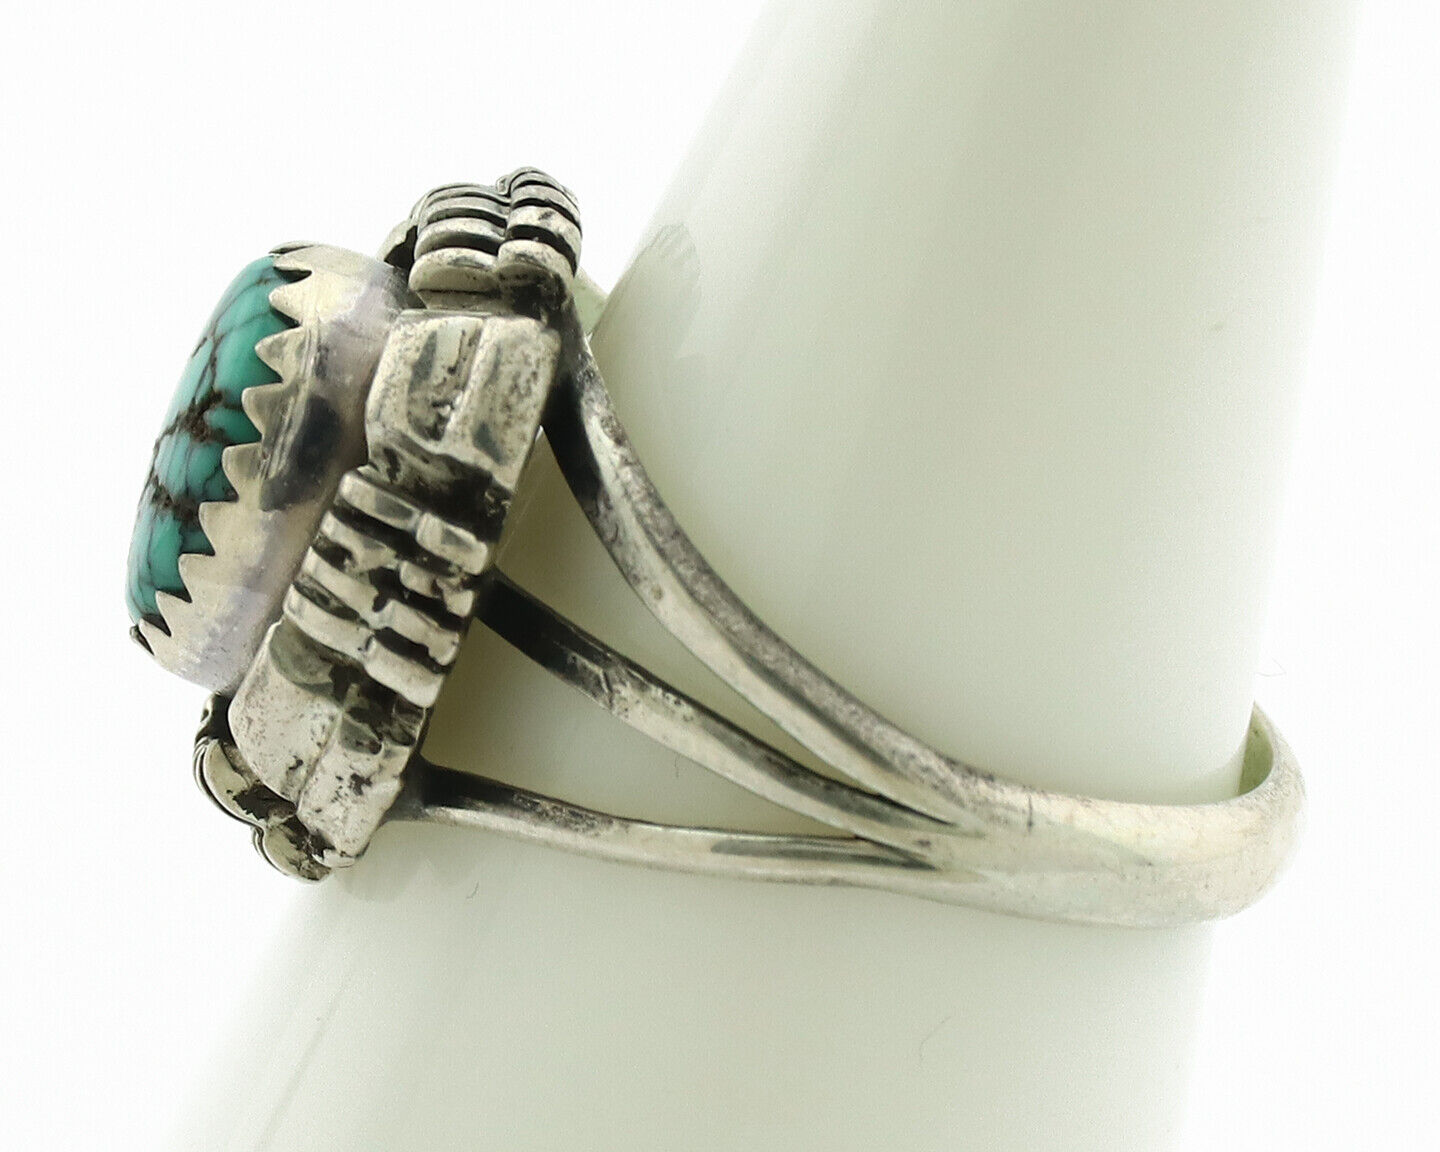 Navajo Ring .925 Silver Sleeping Beauty Turquoise Signed TLW C.80's